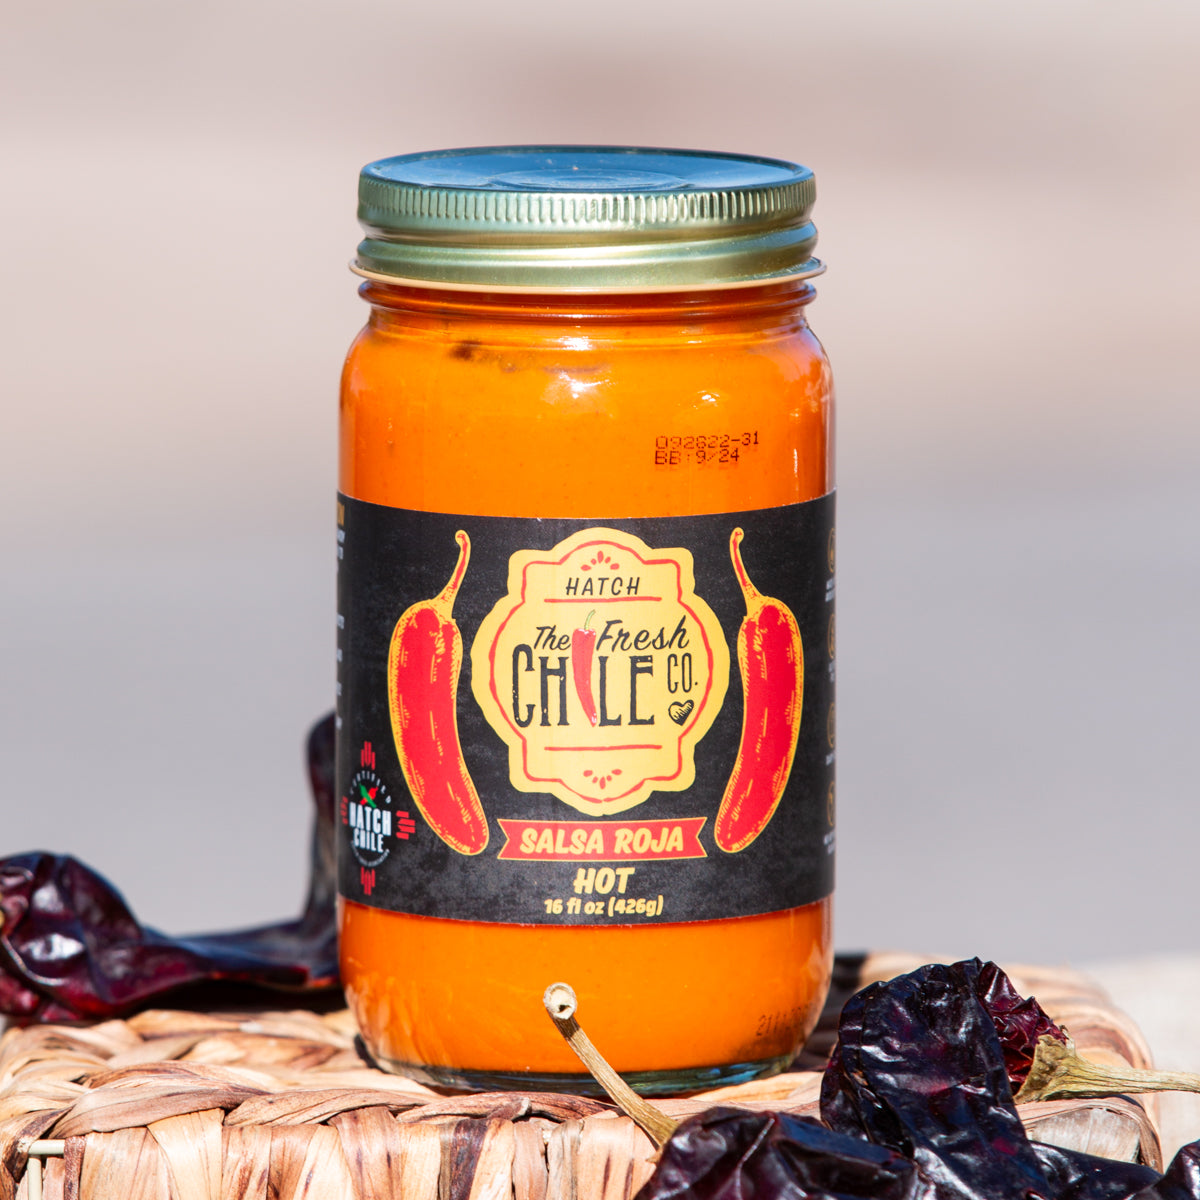 A jar of Hatch Jalapeño Salsa Roja from Hatch New Mexico, stands on a wicker mat surrounded by dried chile peppers. The label features bright red peppers and indicates